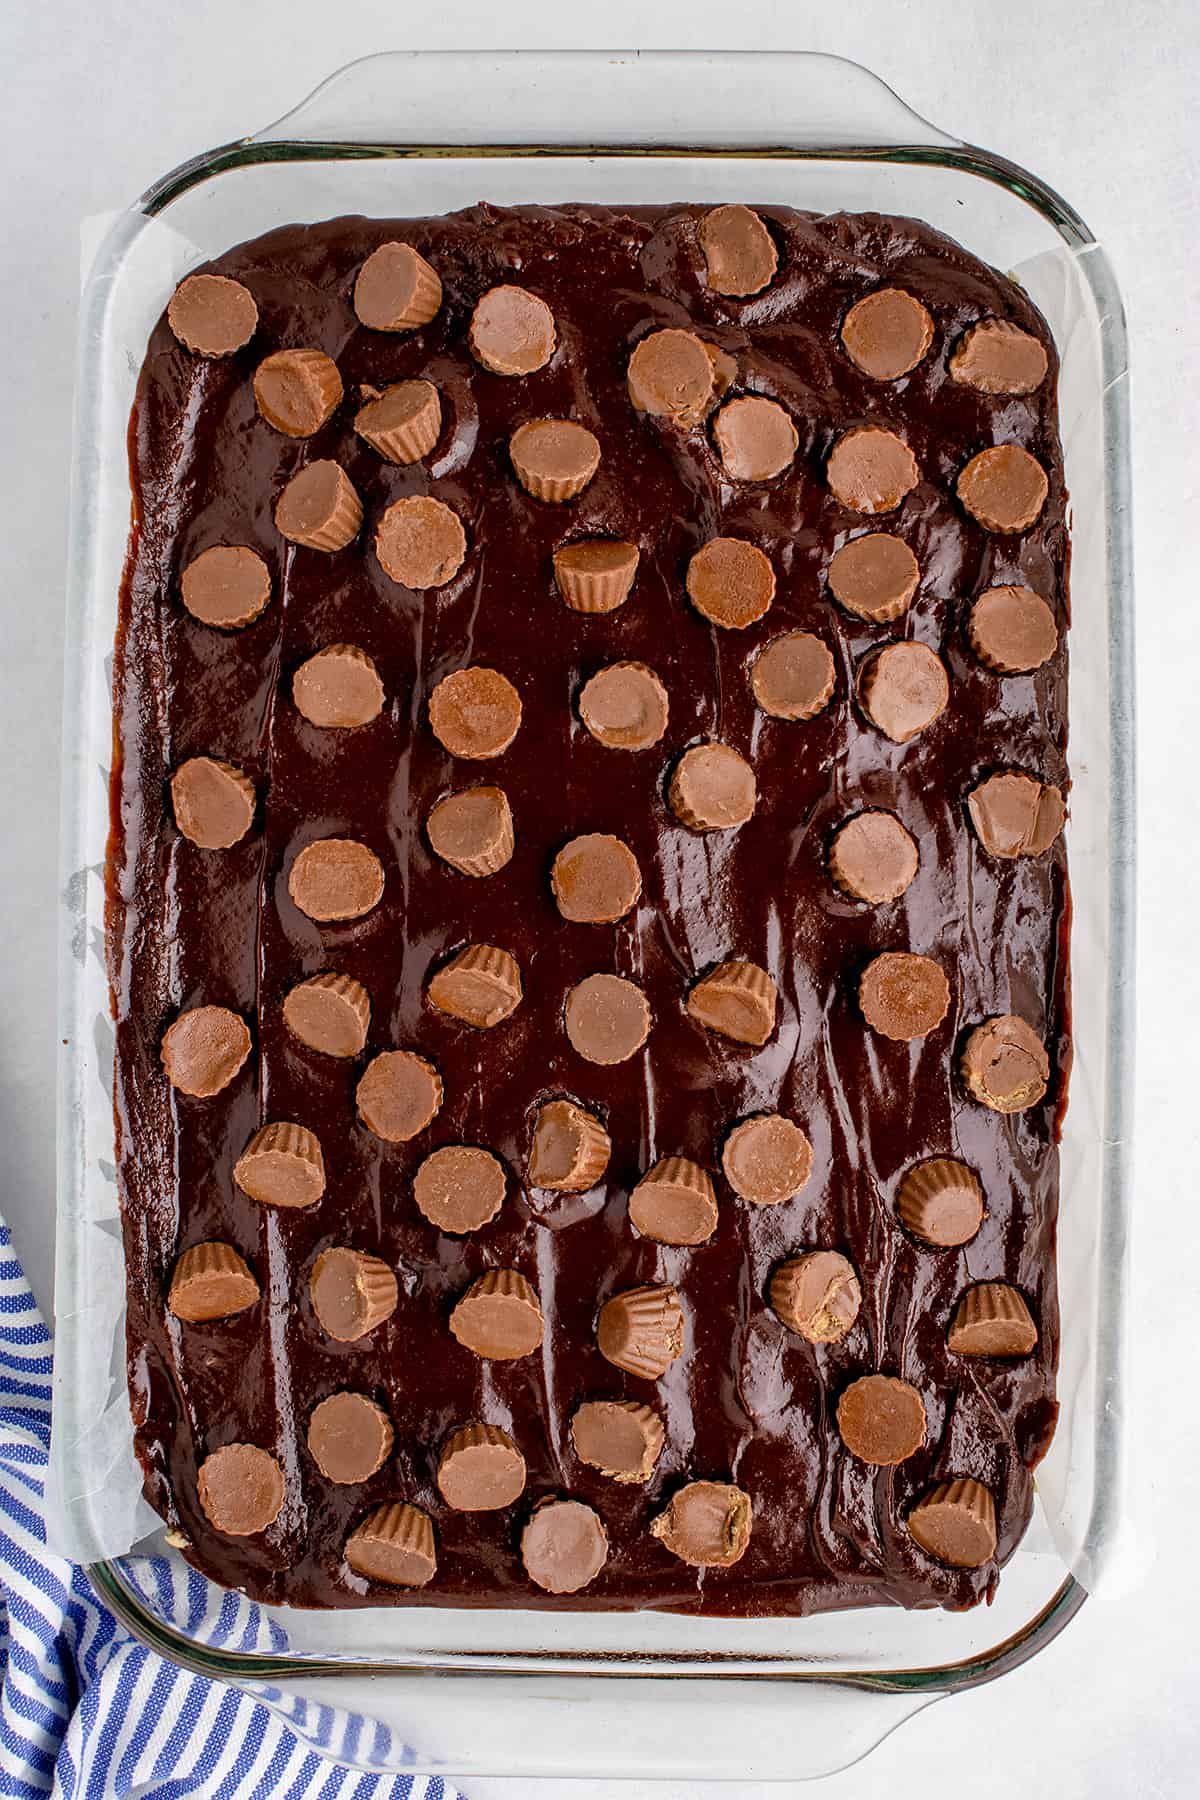 Reese's pressed into chocolate frosting.